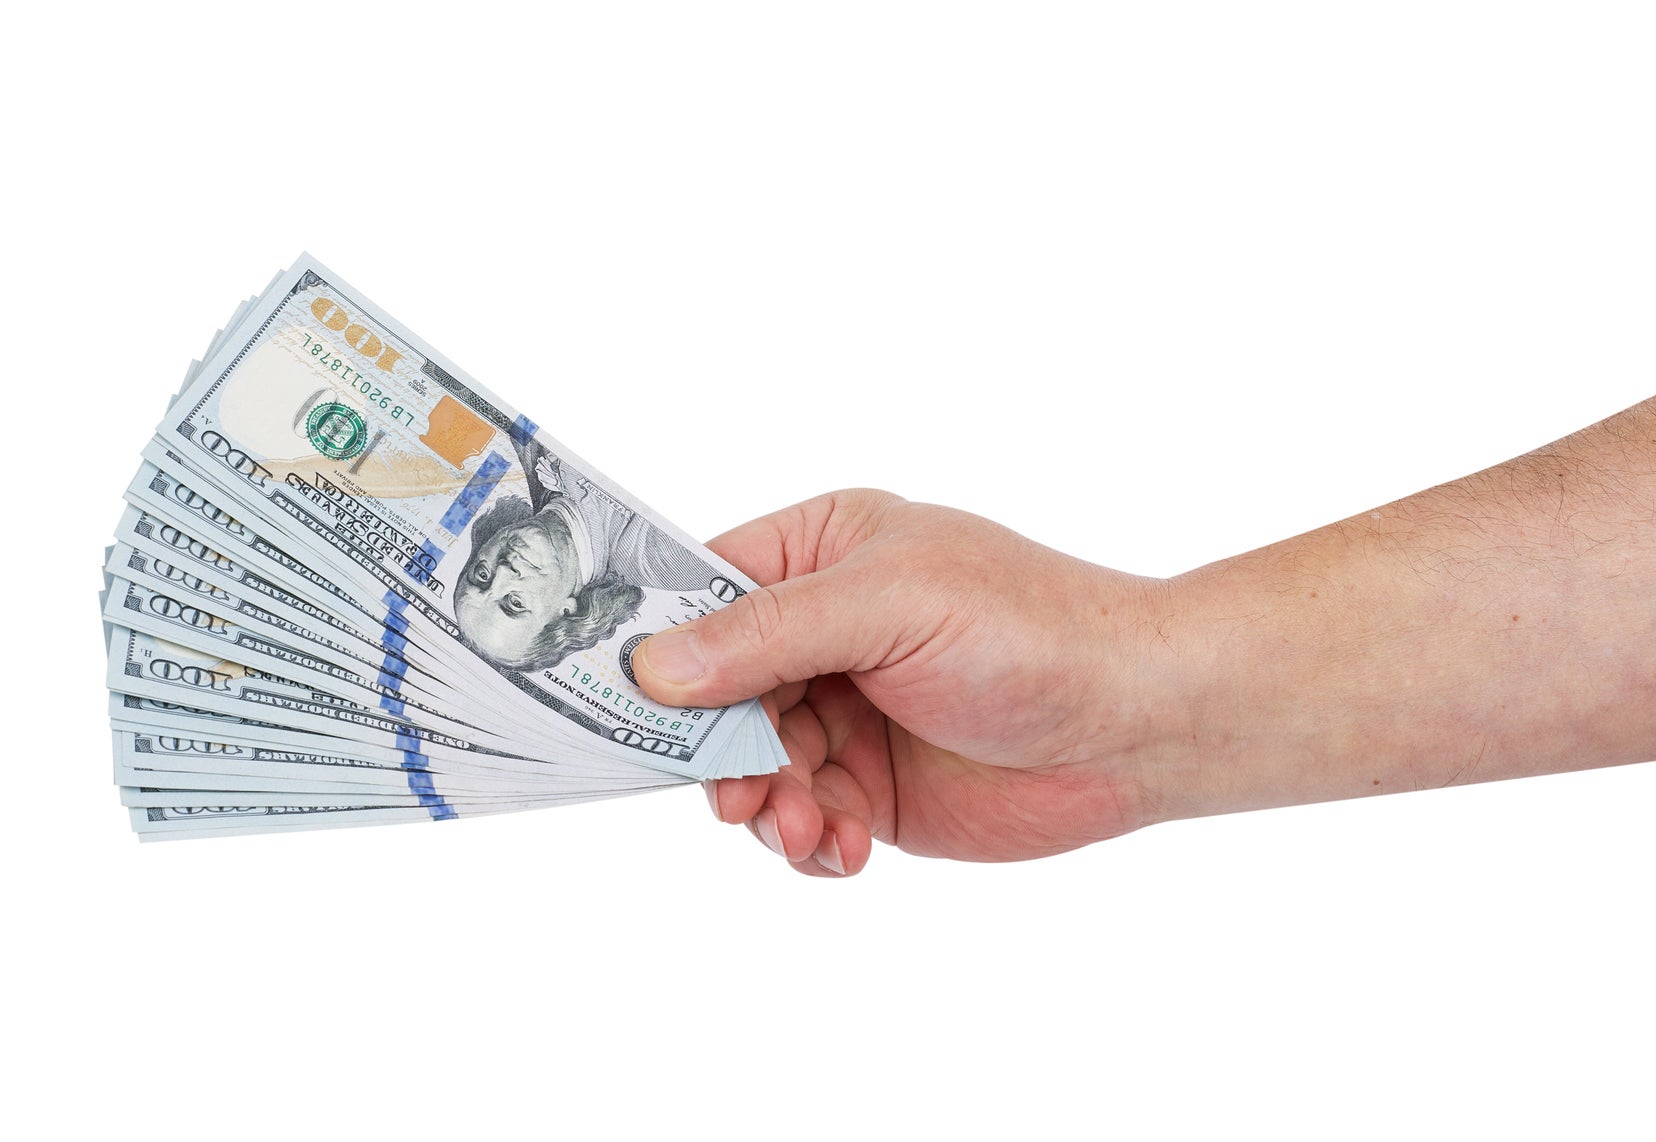 A hand holding a fanned-out stack of US hundred-dollar bills, isolated on a white background